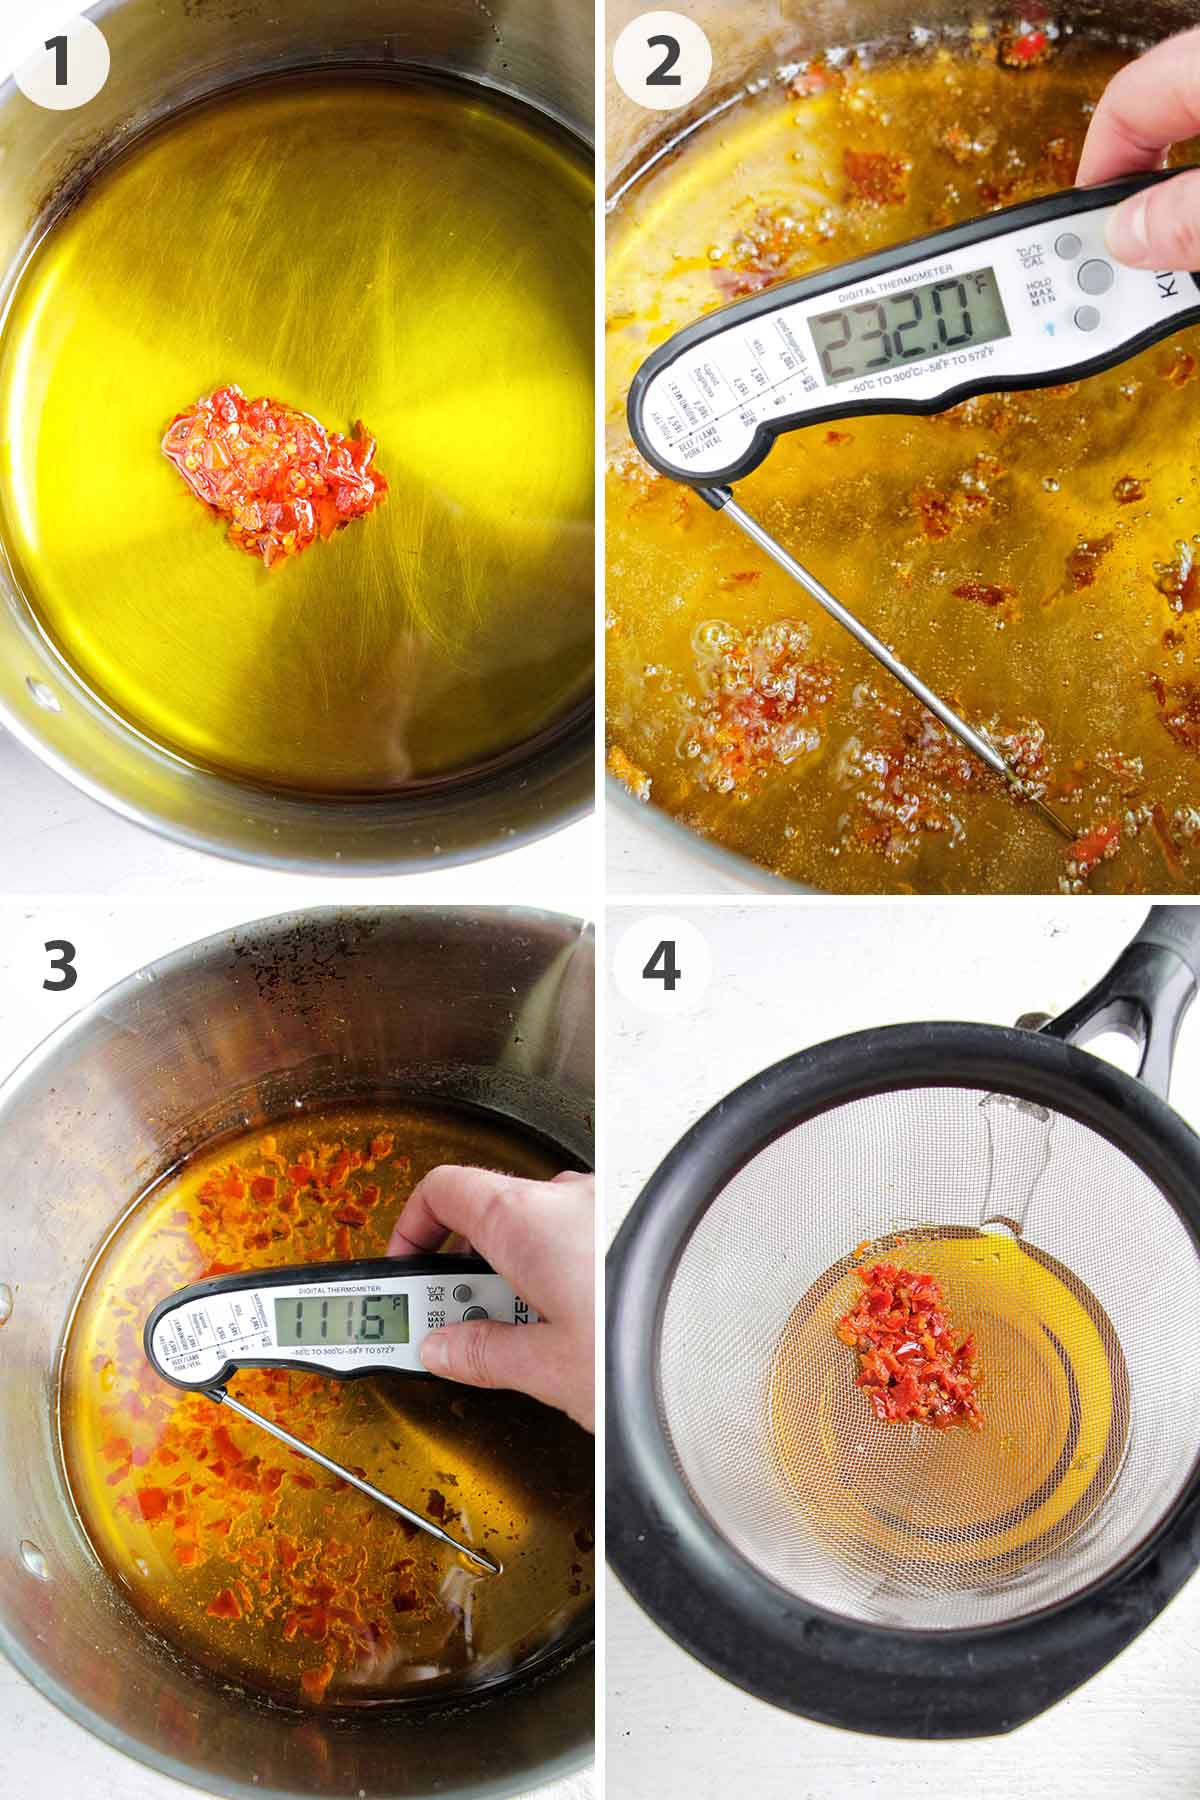 four numbered photos showing how to make Calabrian chili oil.